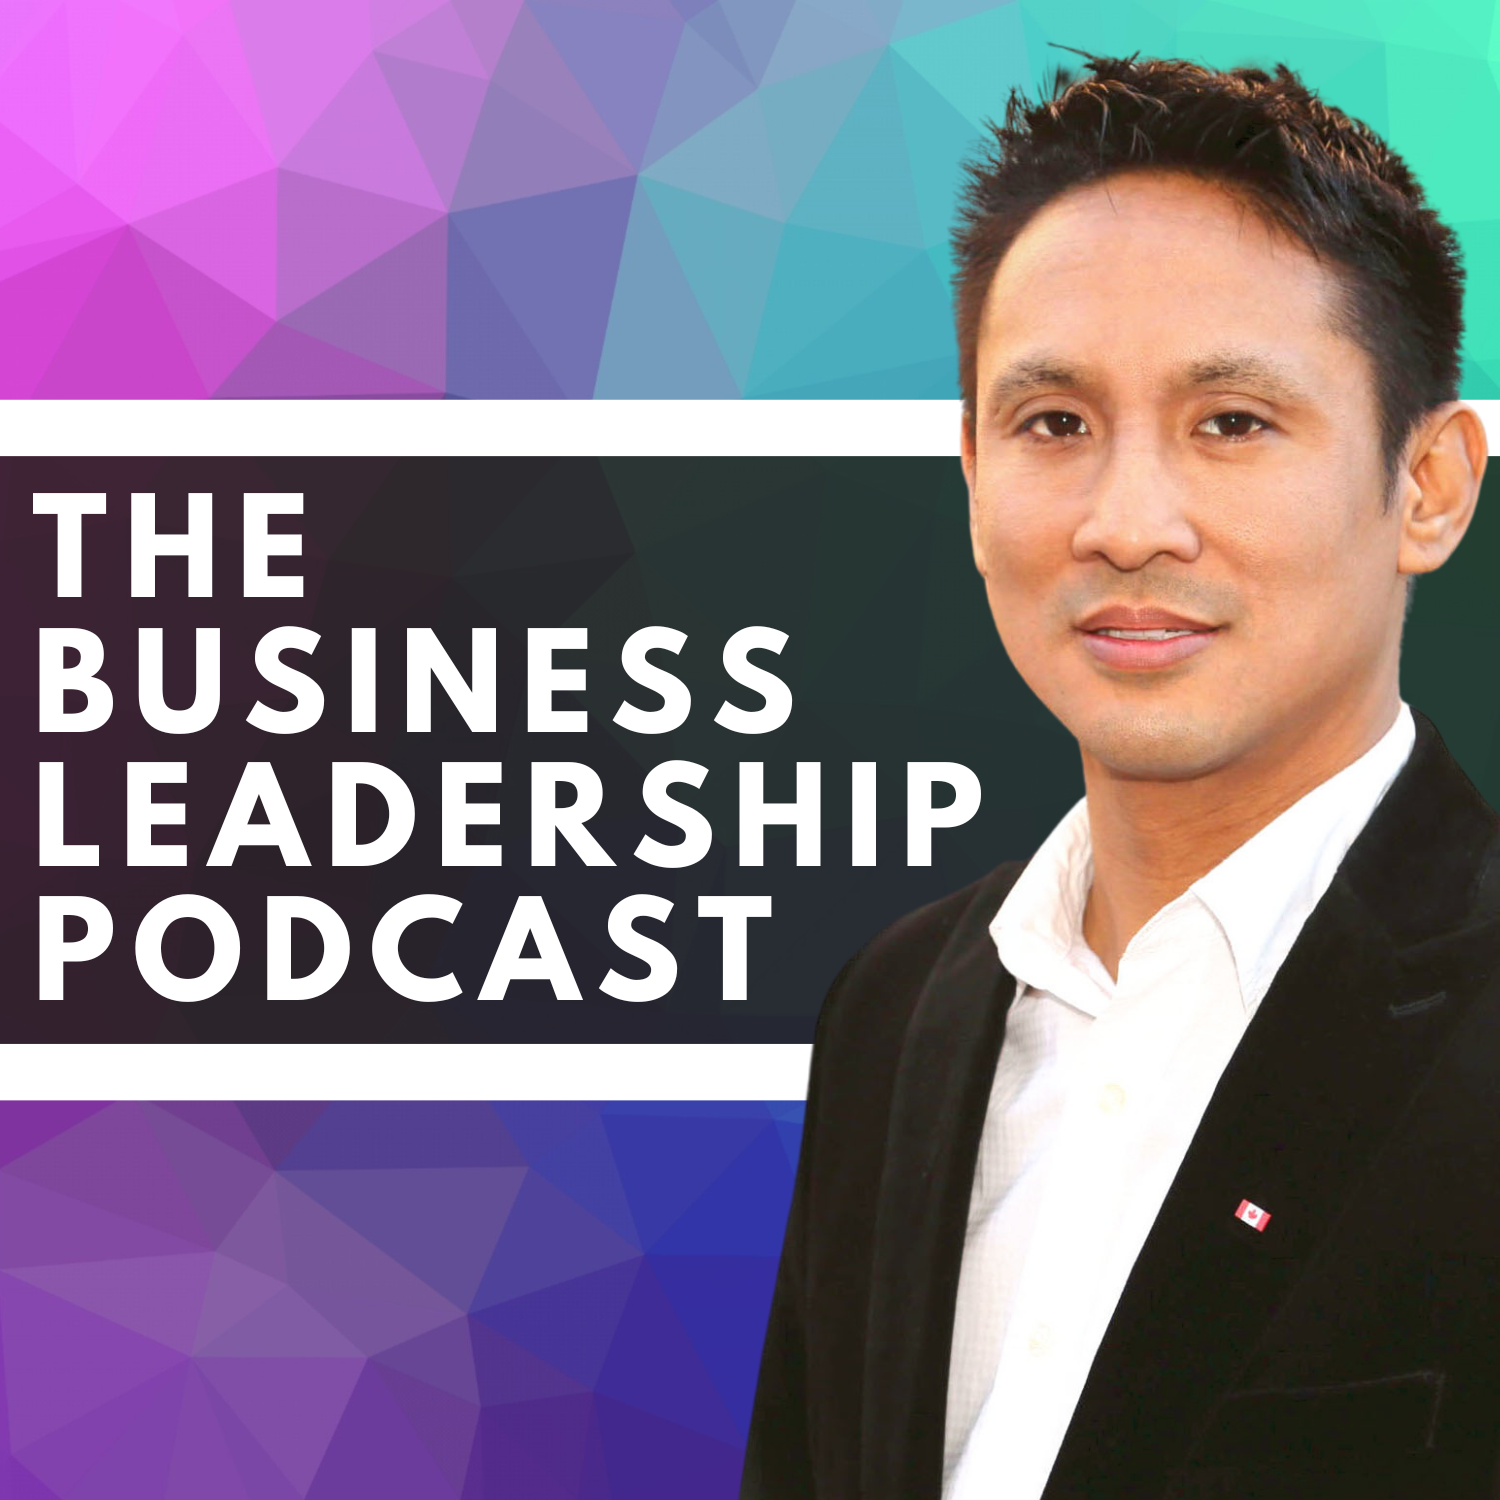 Best Leaders Podcast The Business Leadership Podcast